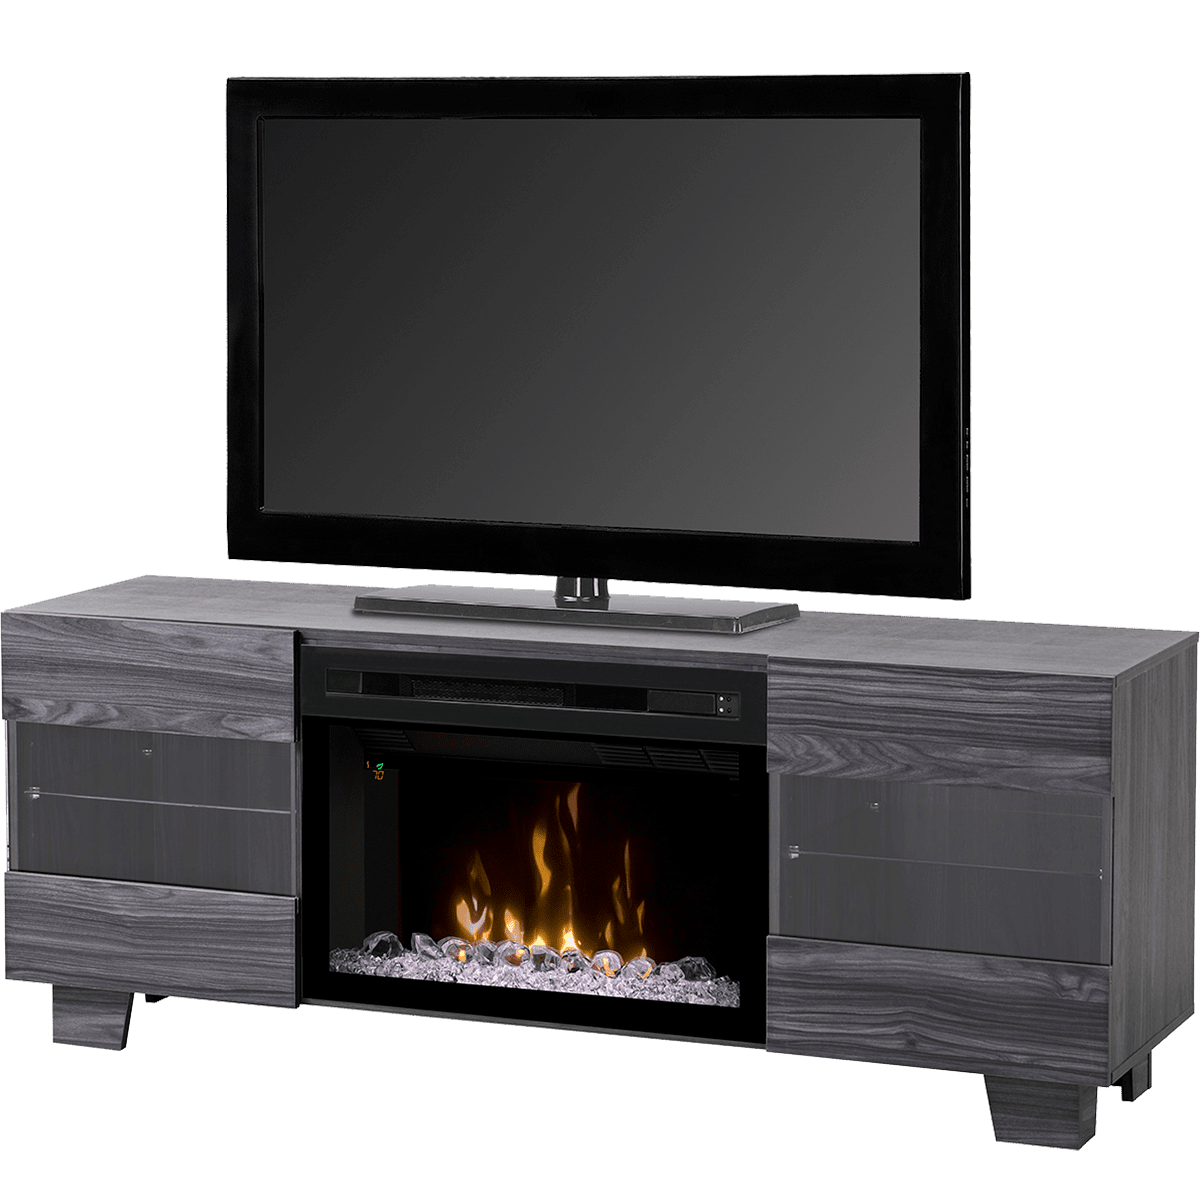 The Dimplex Max Media Console Electric Fireplace offers 120v of contemporary style and year-round comfort. Shop Sylvane for expert advice and free shipping!